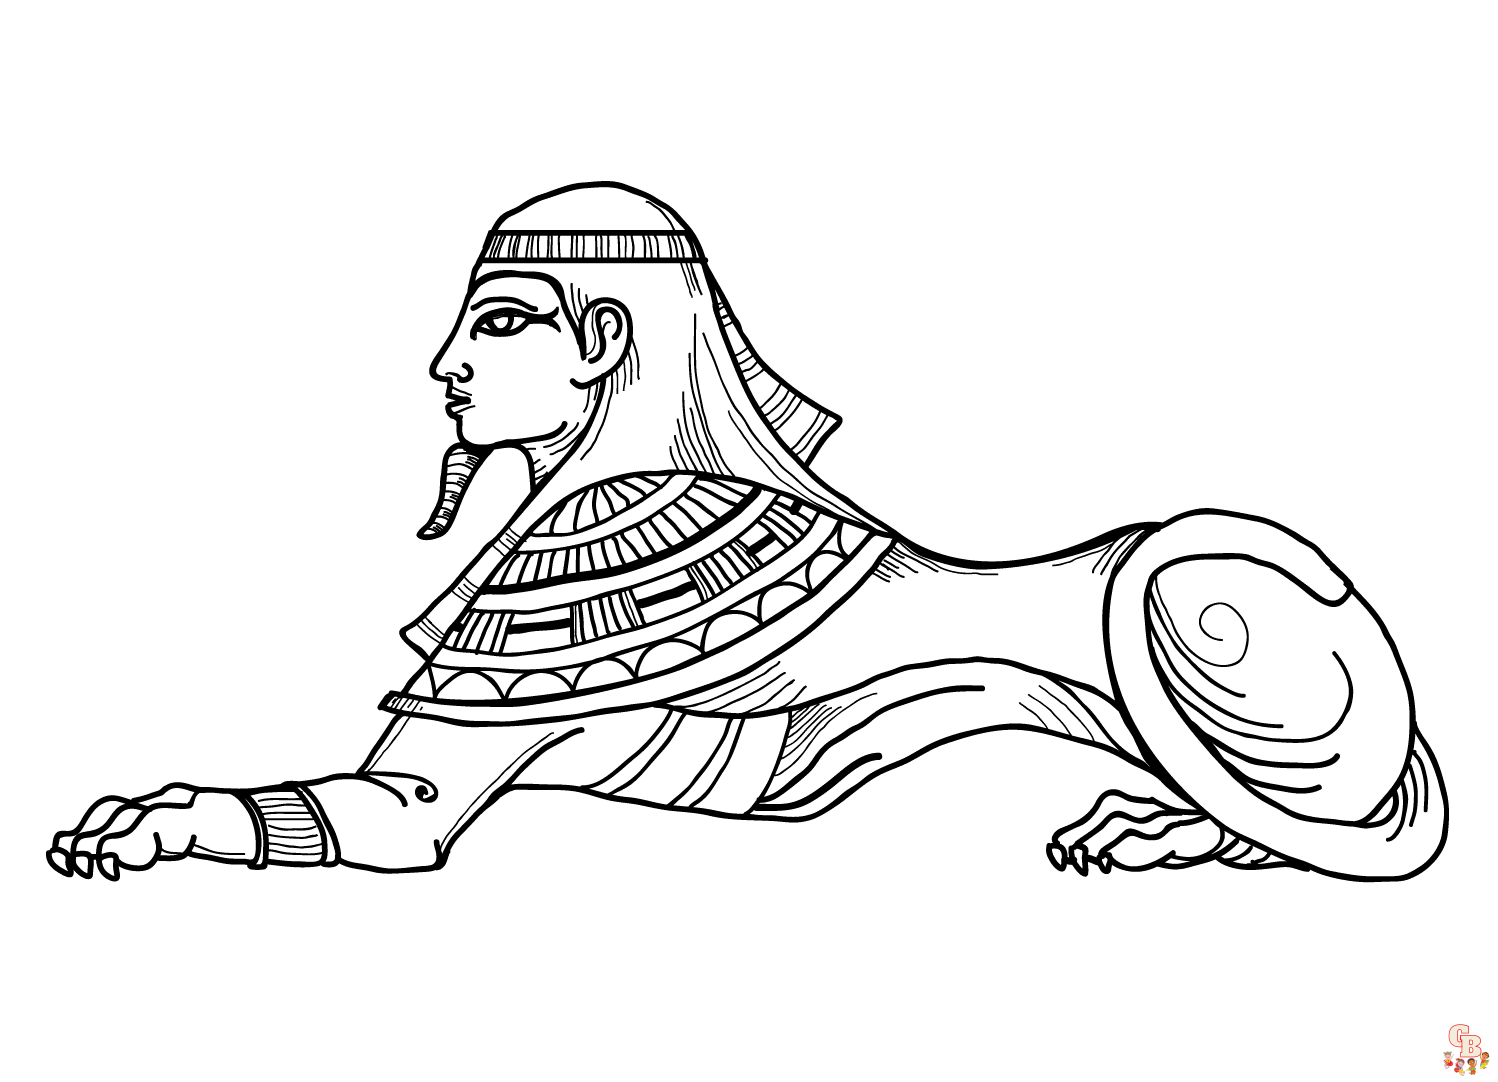 Sphinx coloring pages free